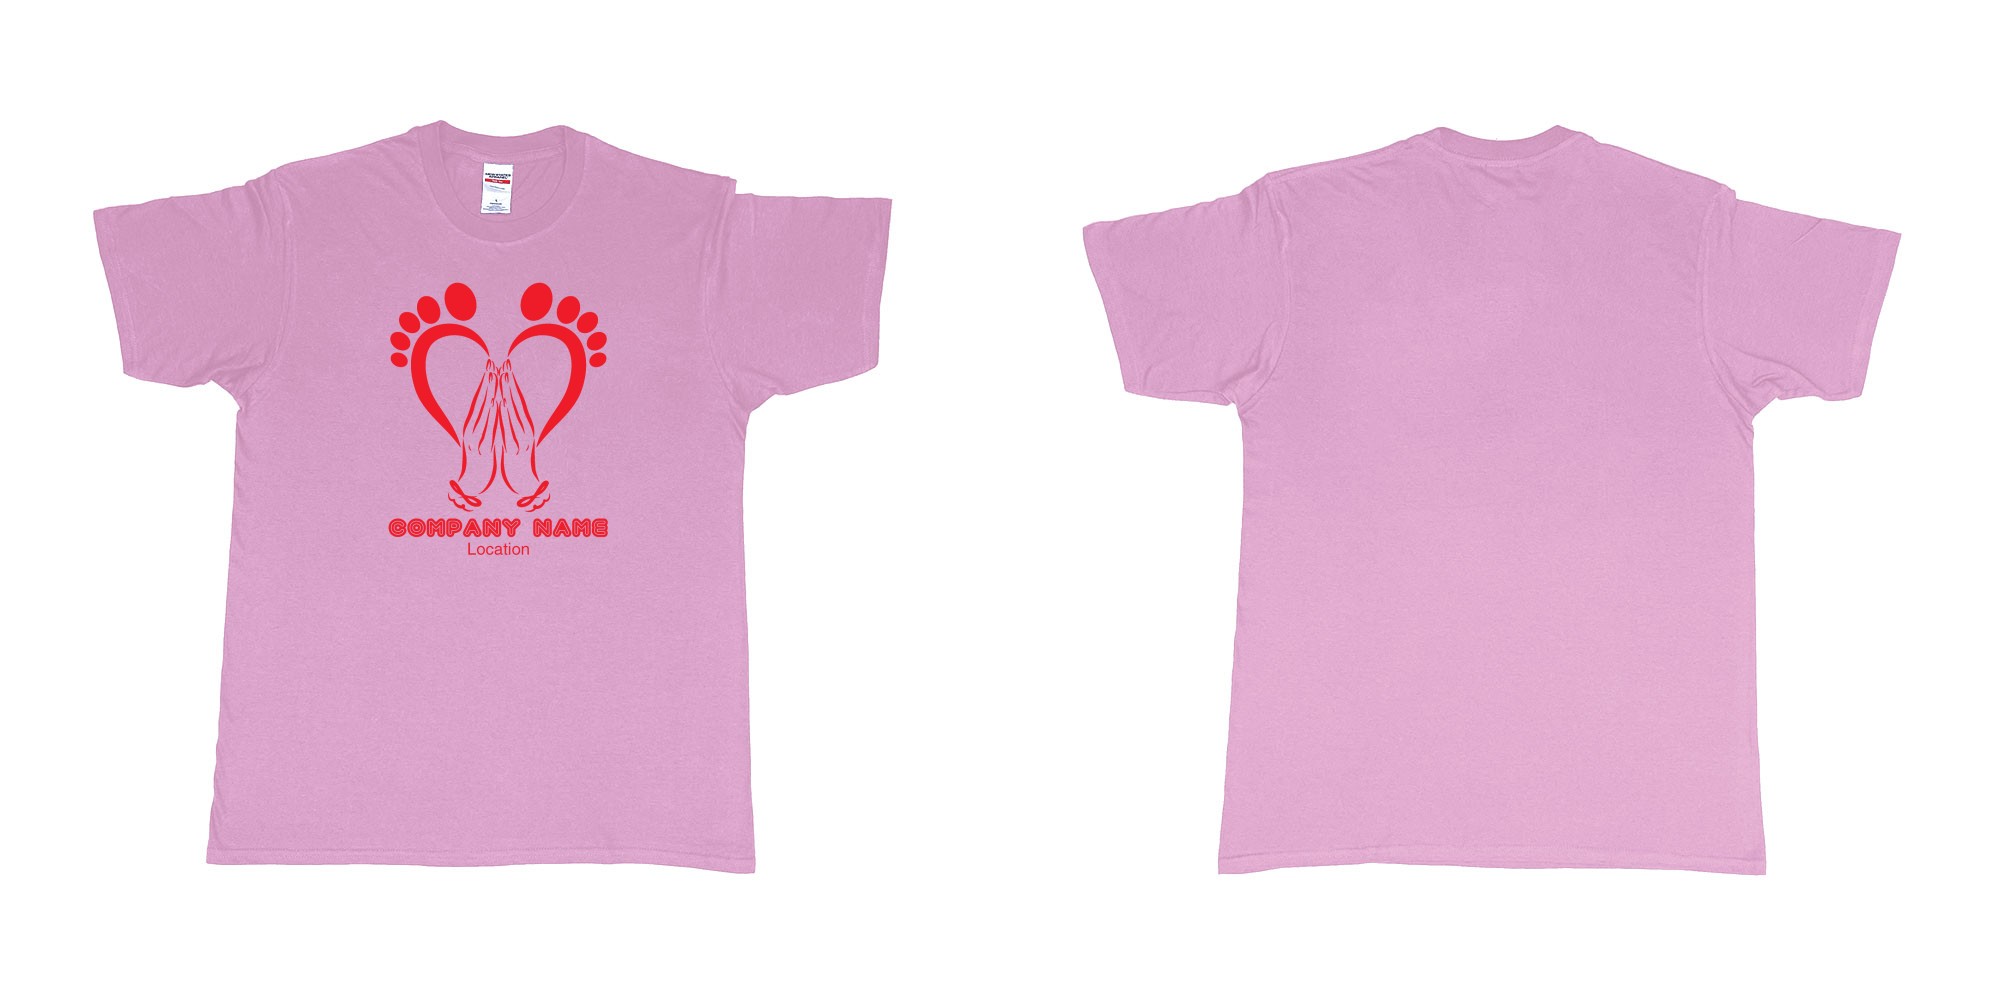 Custom tshirt design podiatrist chiropodist feet care specialist heart shaped feet with caring hands in fabric color light-pink choice your own text made in Bali by The Pirate Way